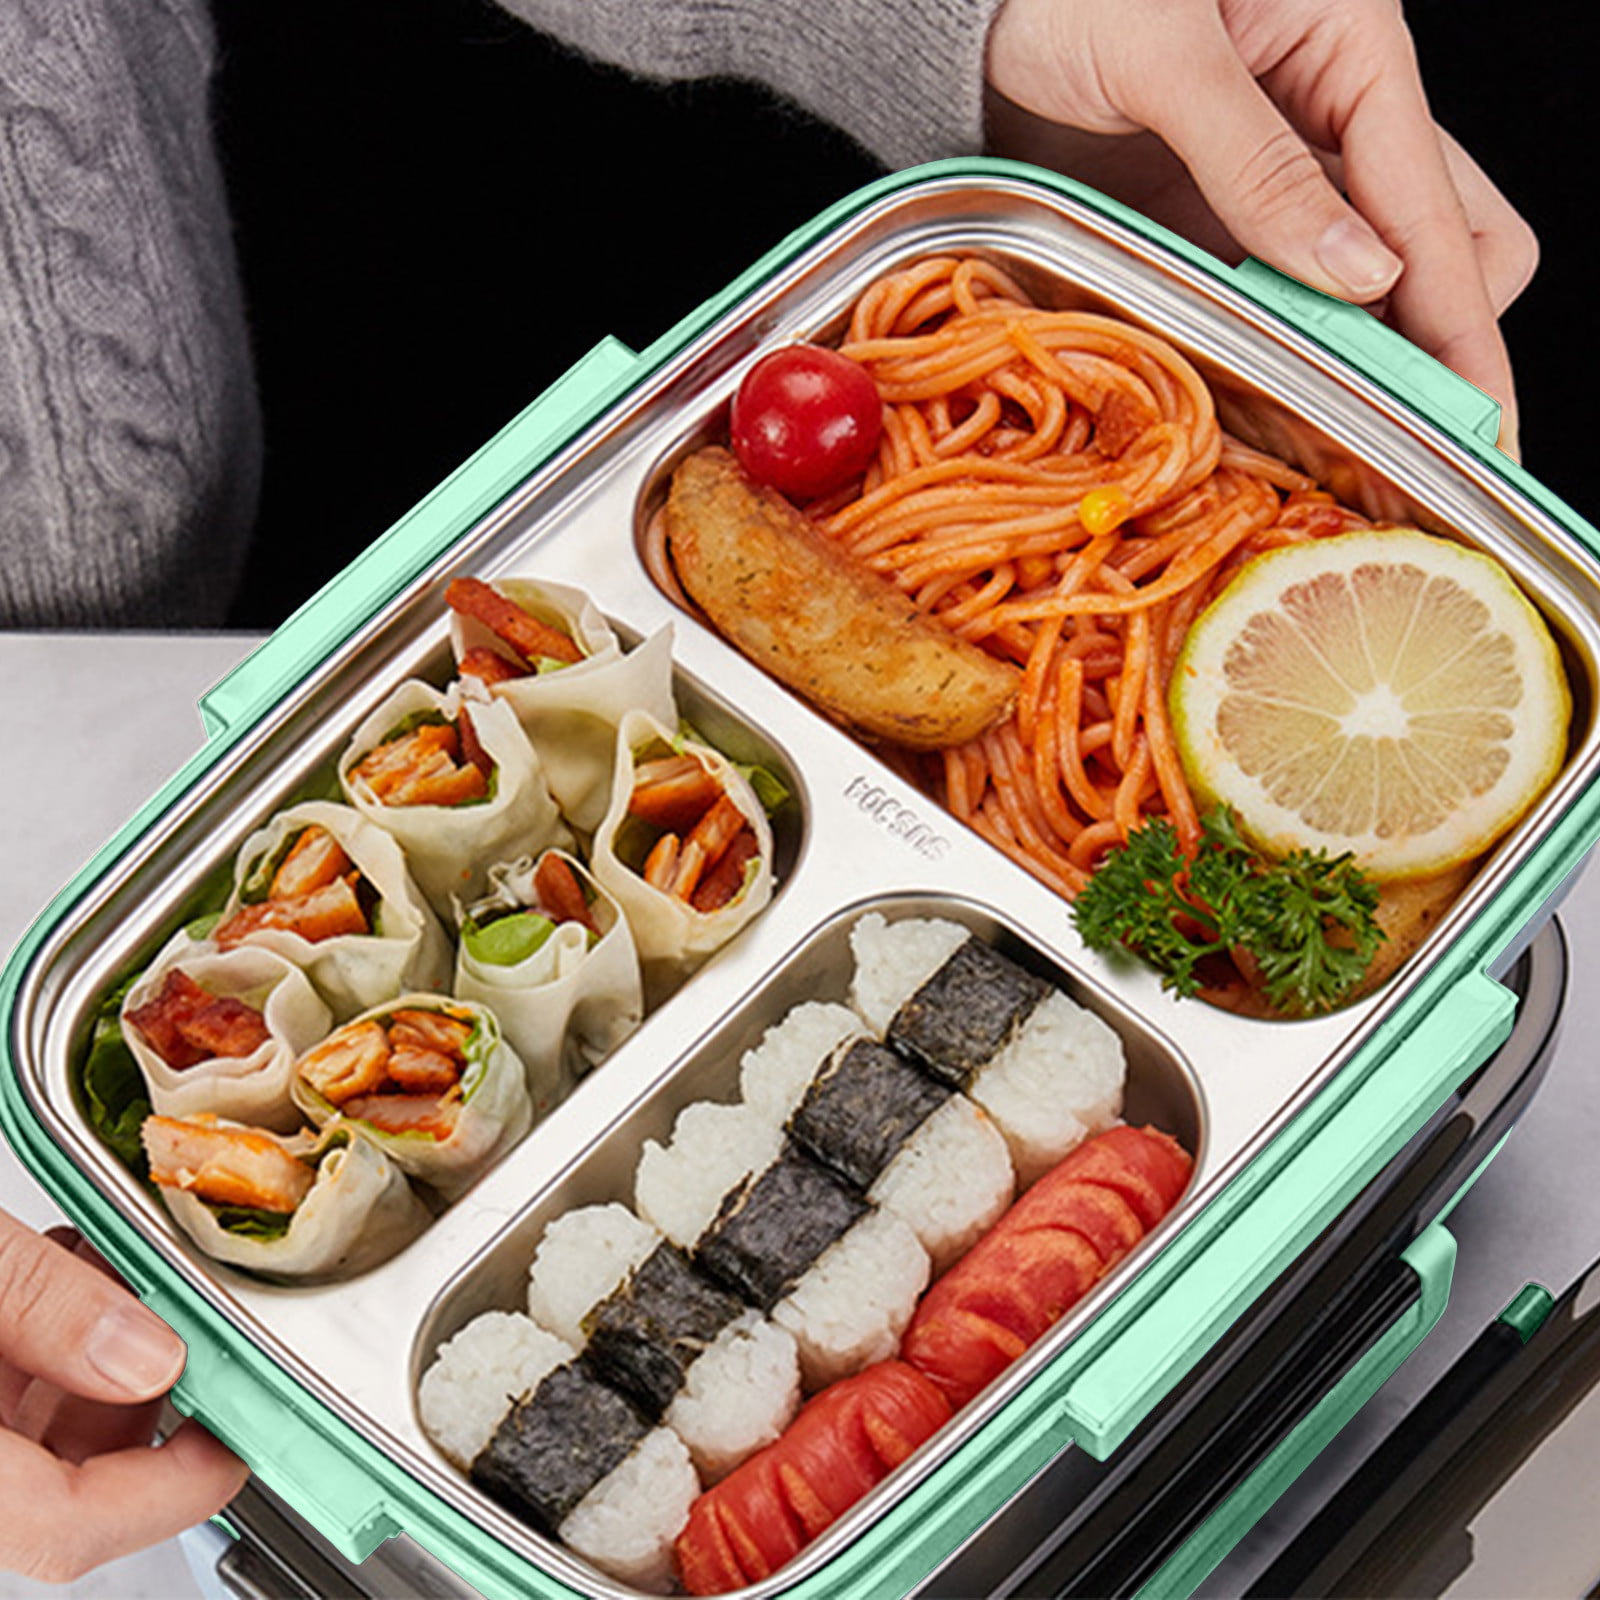 TUTUnaumb Lunch Box Kids,Bento Box Adult Lunch Box,Lunch Containers For  Adults/Kids/Toddler,1200Ml-5 Compartment Bento Lunch Box,Built-In Reusable